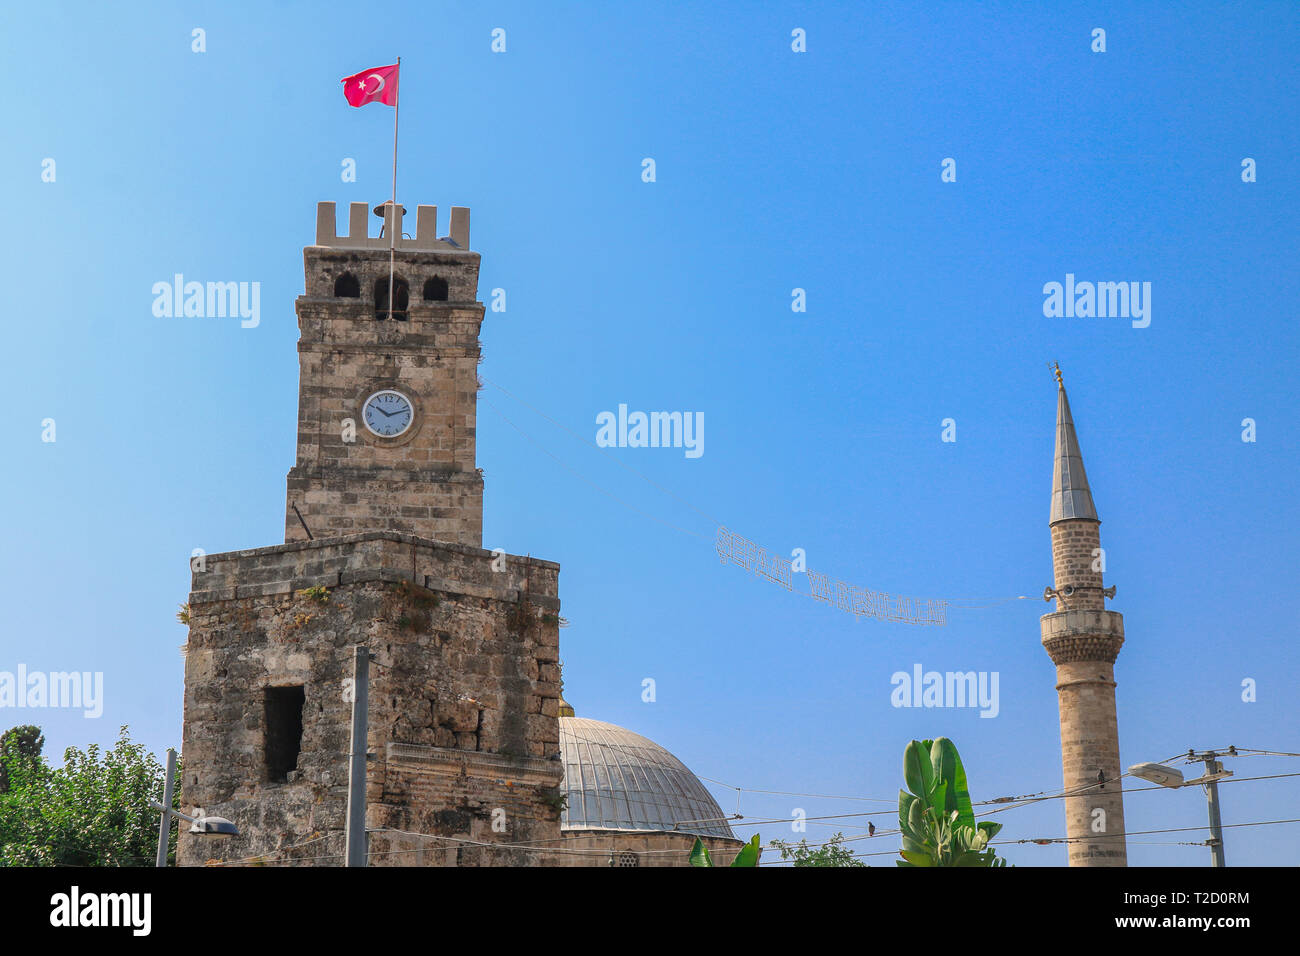 Clock tower and mosque with minaret in background. Antalya, Turkey. Stock Photo